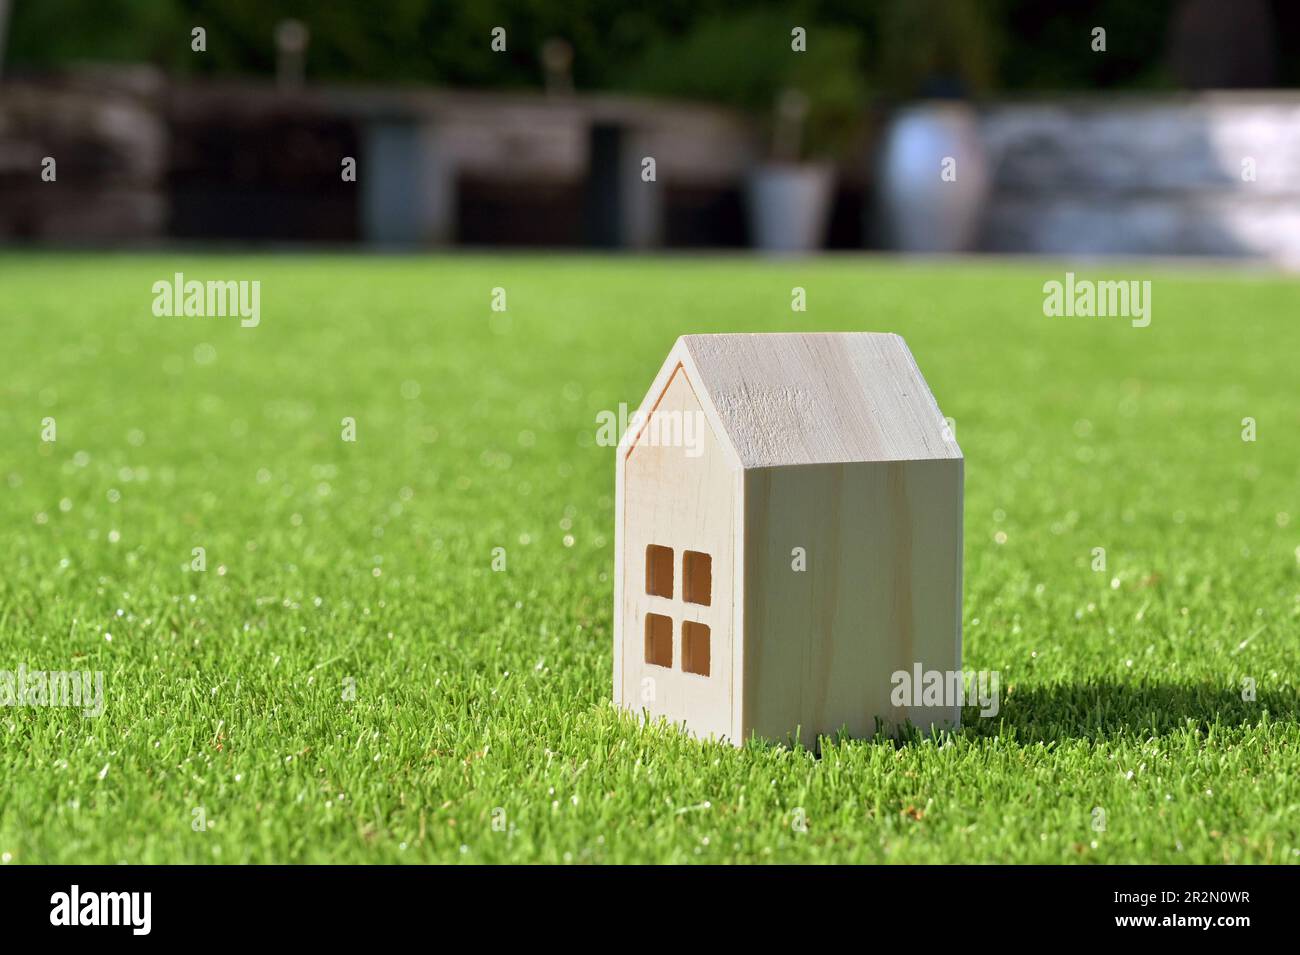 Small wooden model house on a background of short green grass. Housing concept. No people. Copy space. Stock Photo